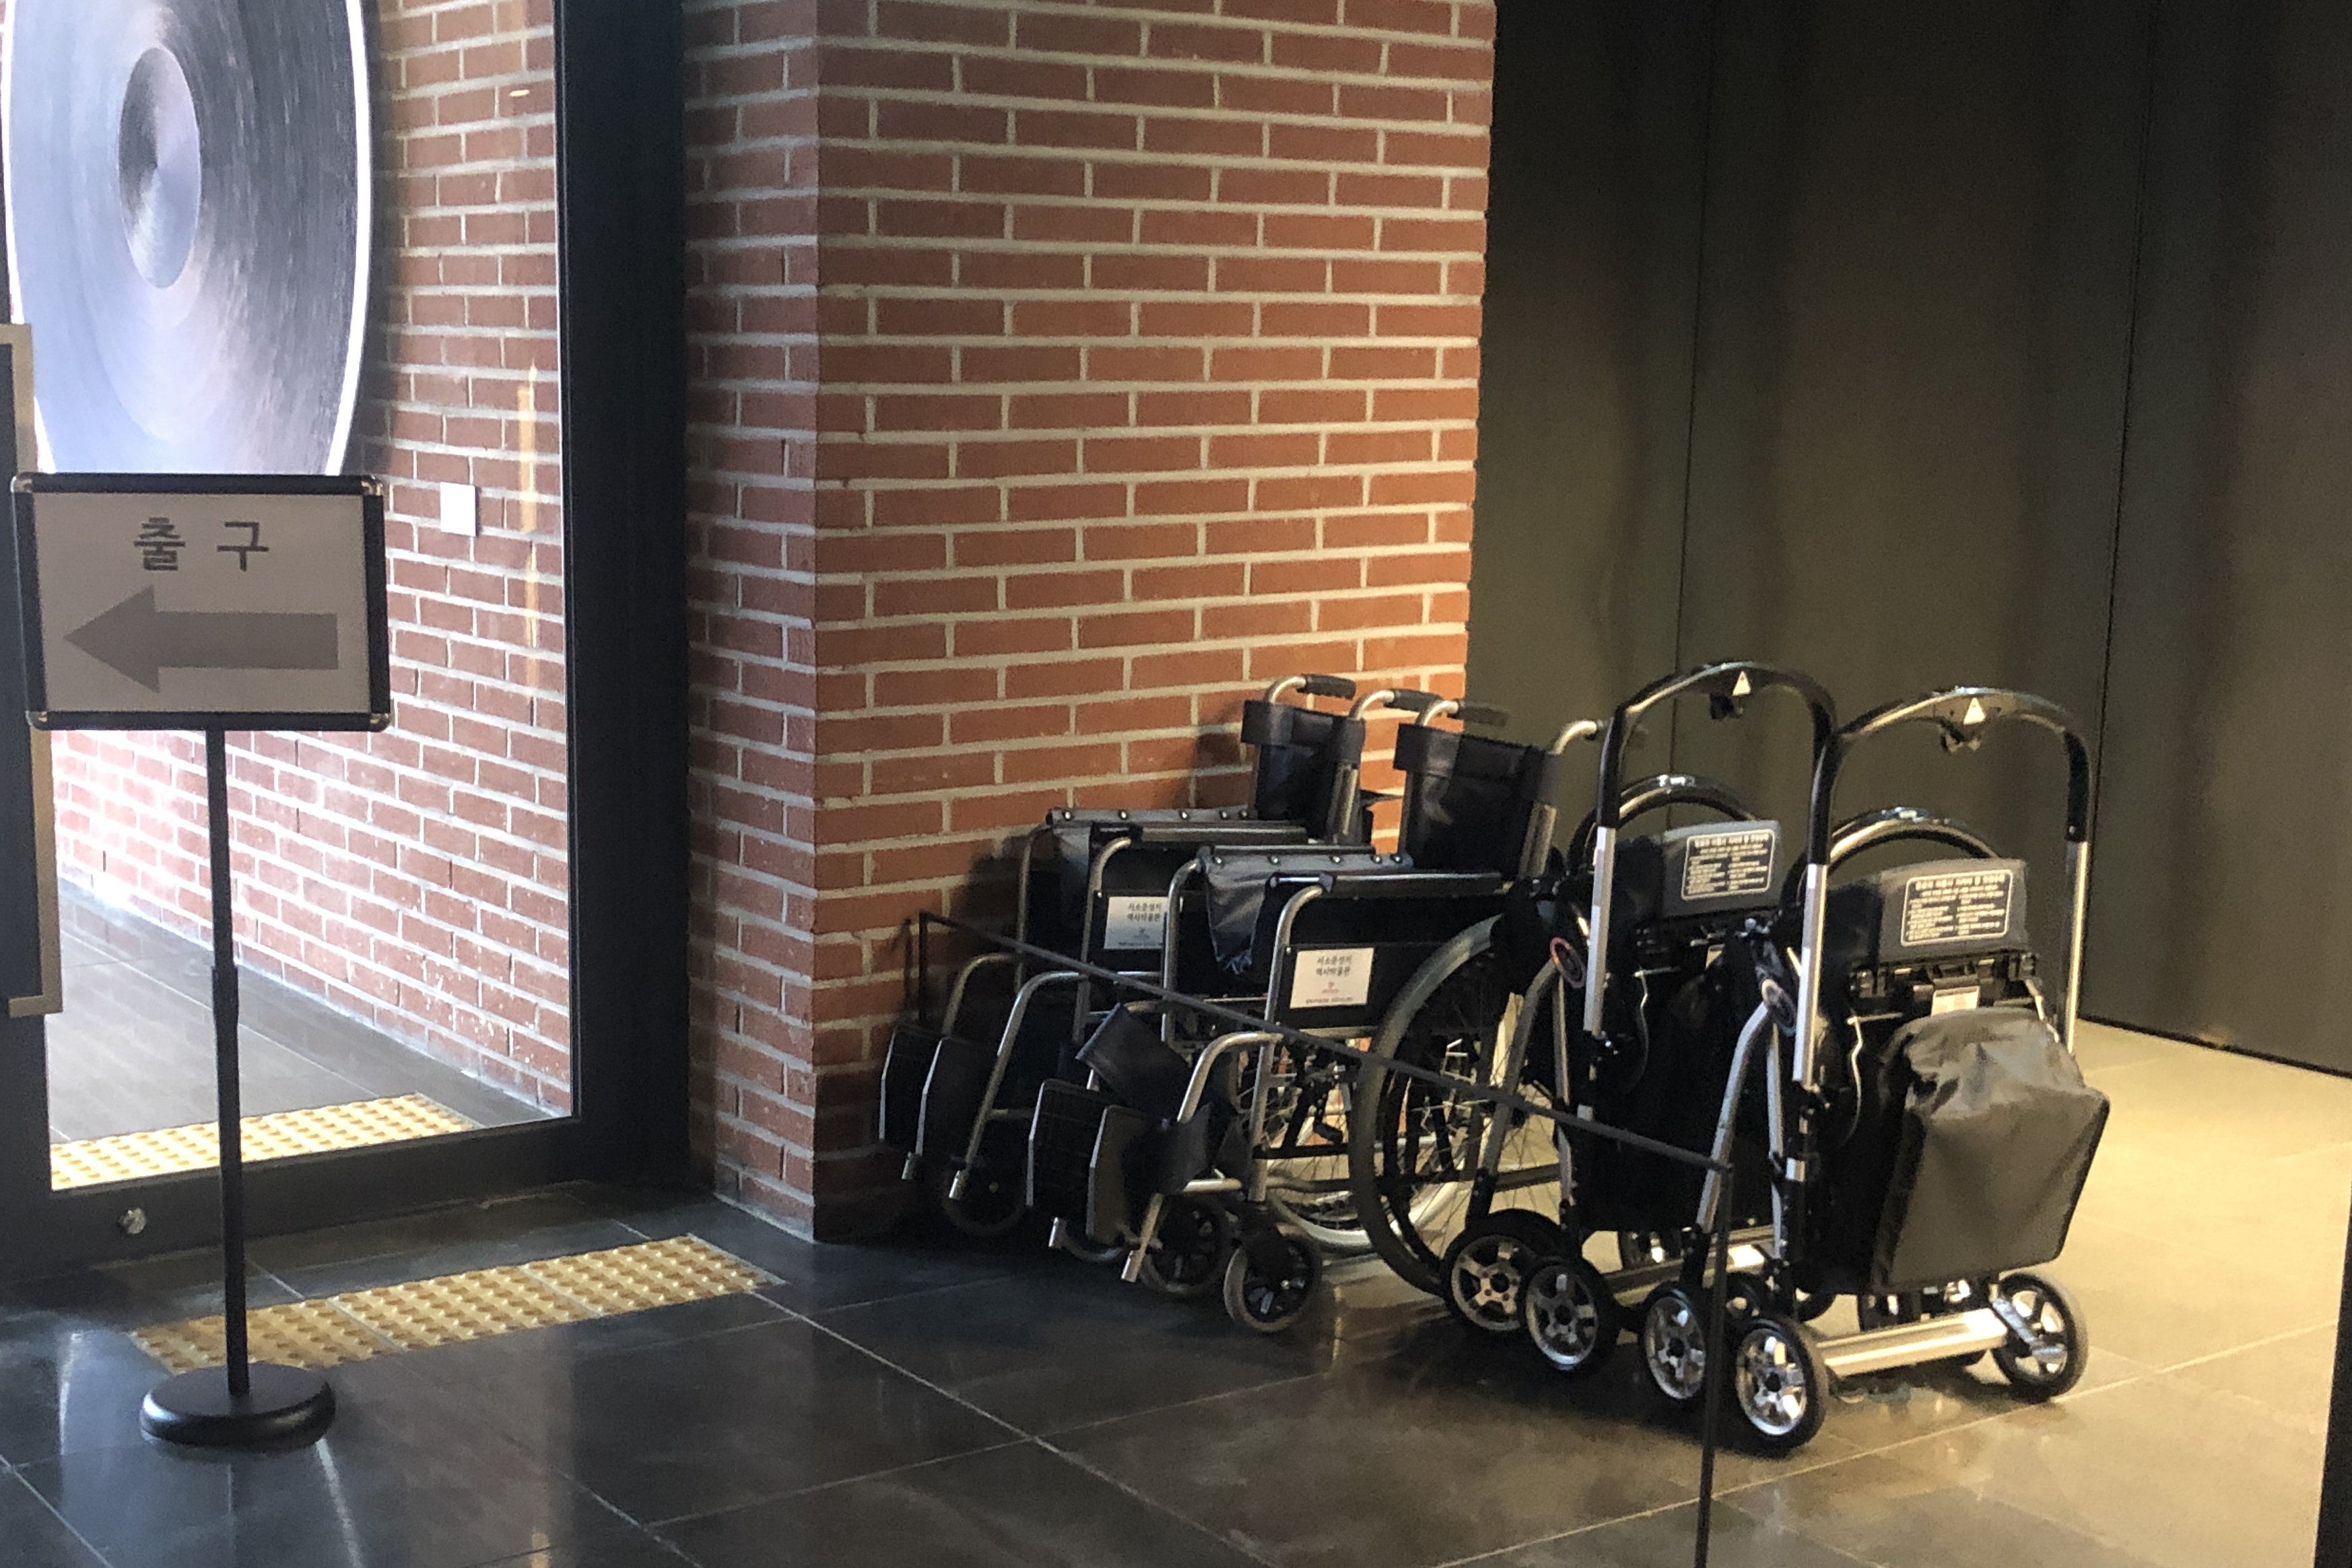 Guide map and information desk0 : Wheelchairs and strollers for rental service at museum
